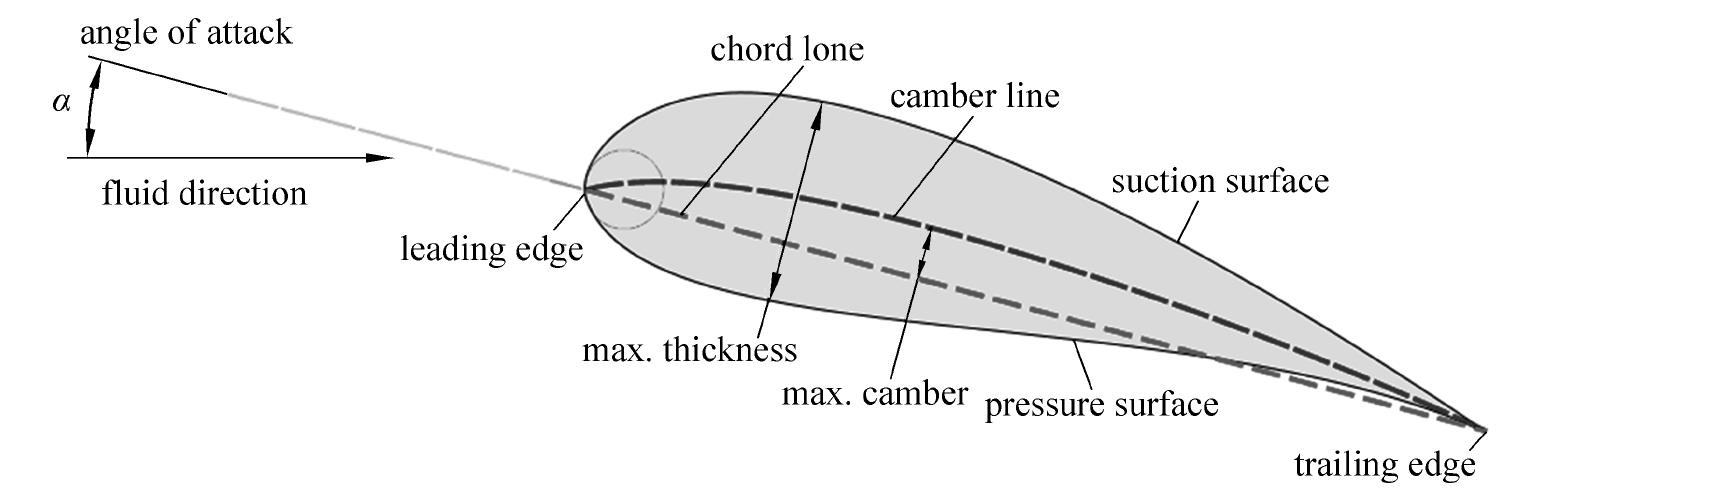 17.3 Airfoil Theory